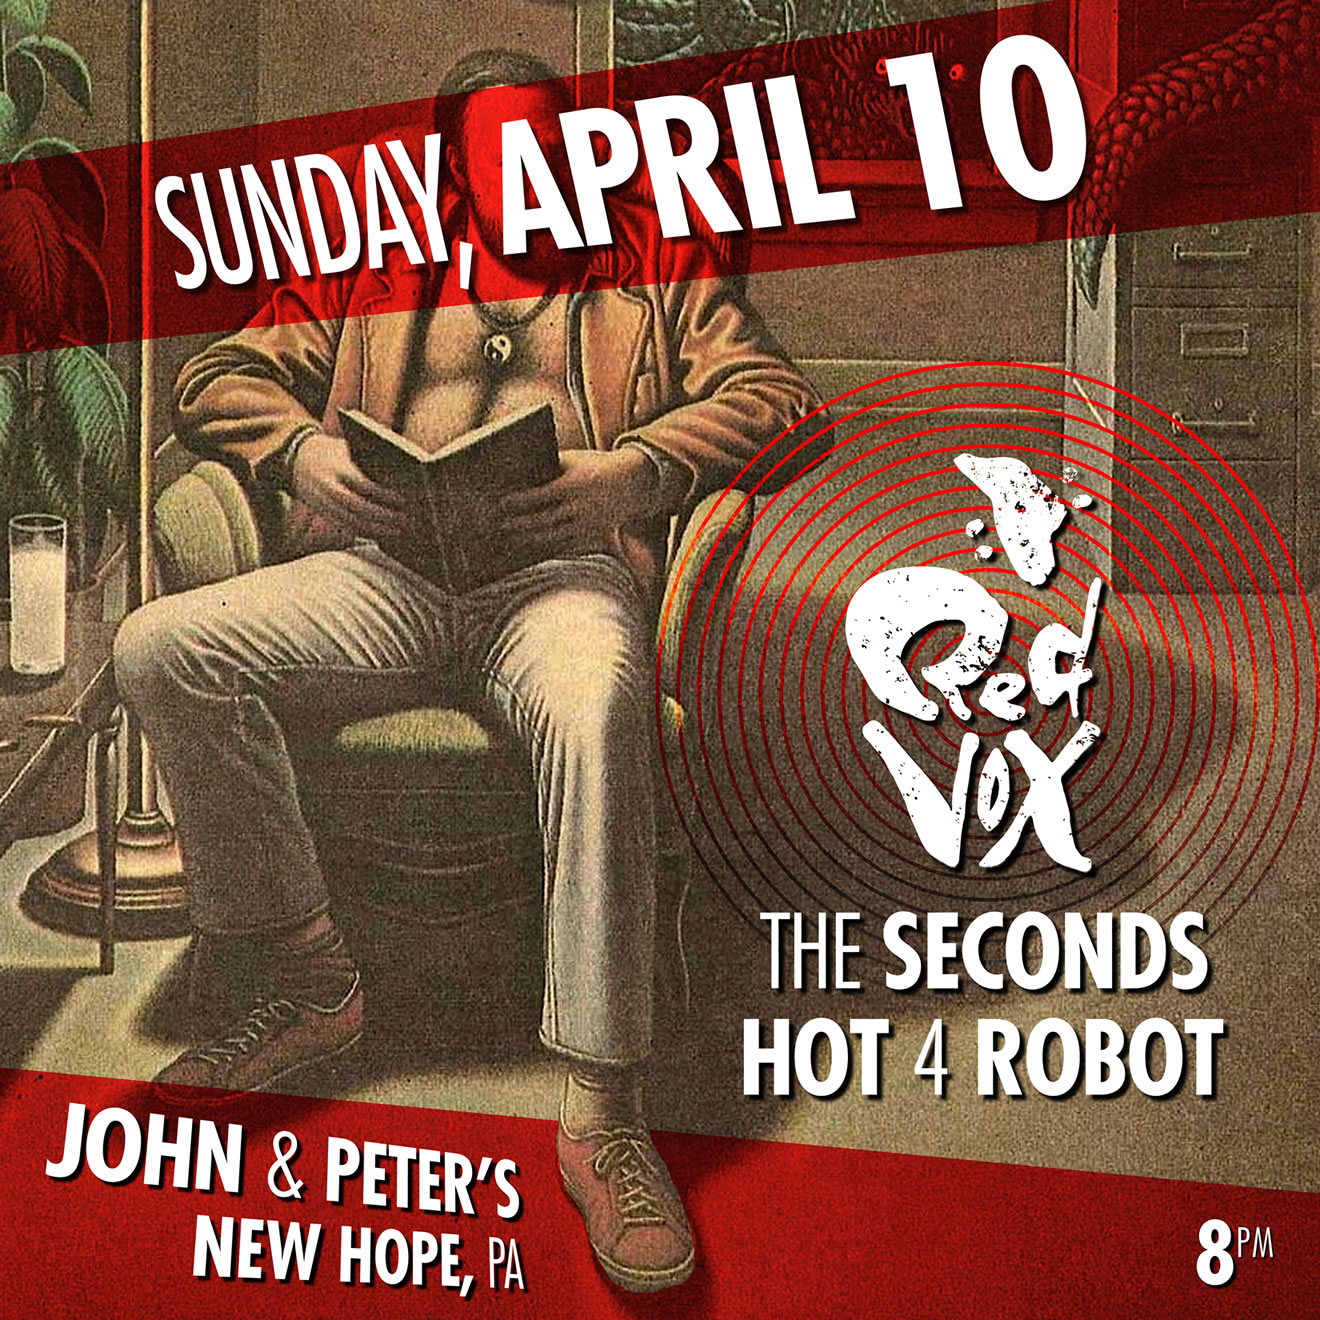 Red Vox, The Seconds & Hot 4 Robot live at John & Peter's